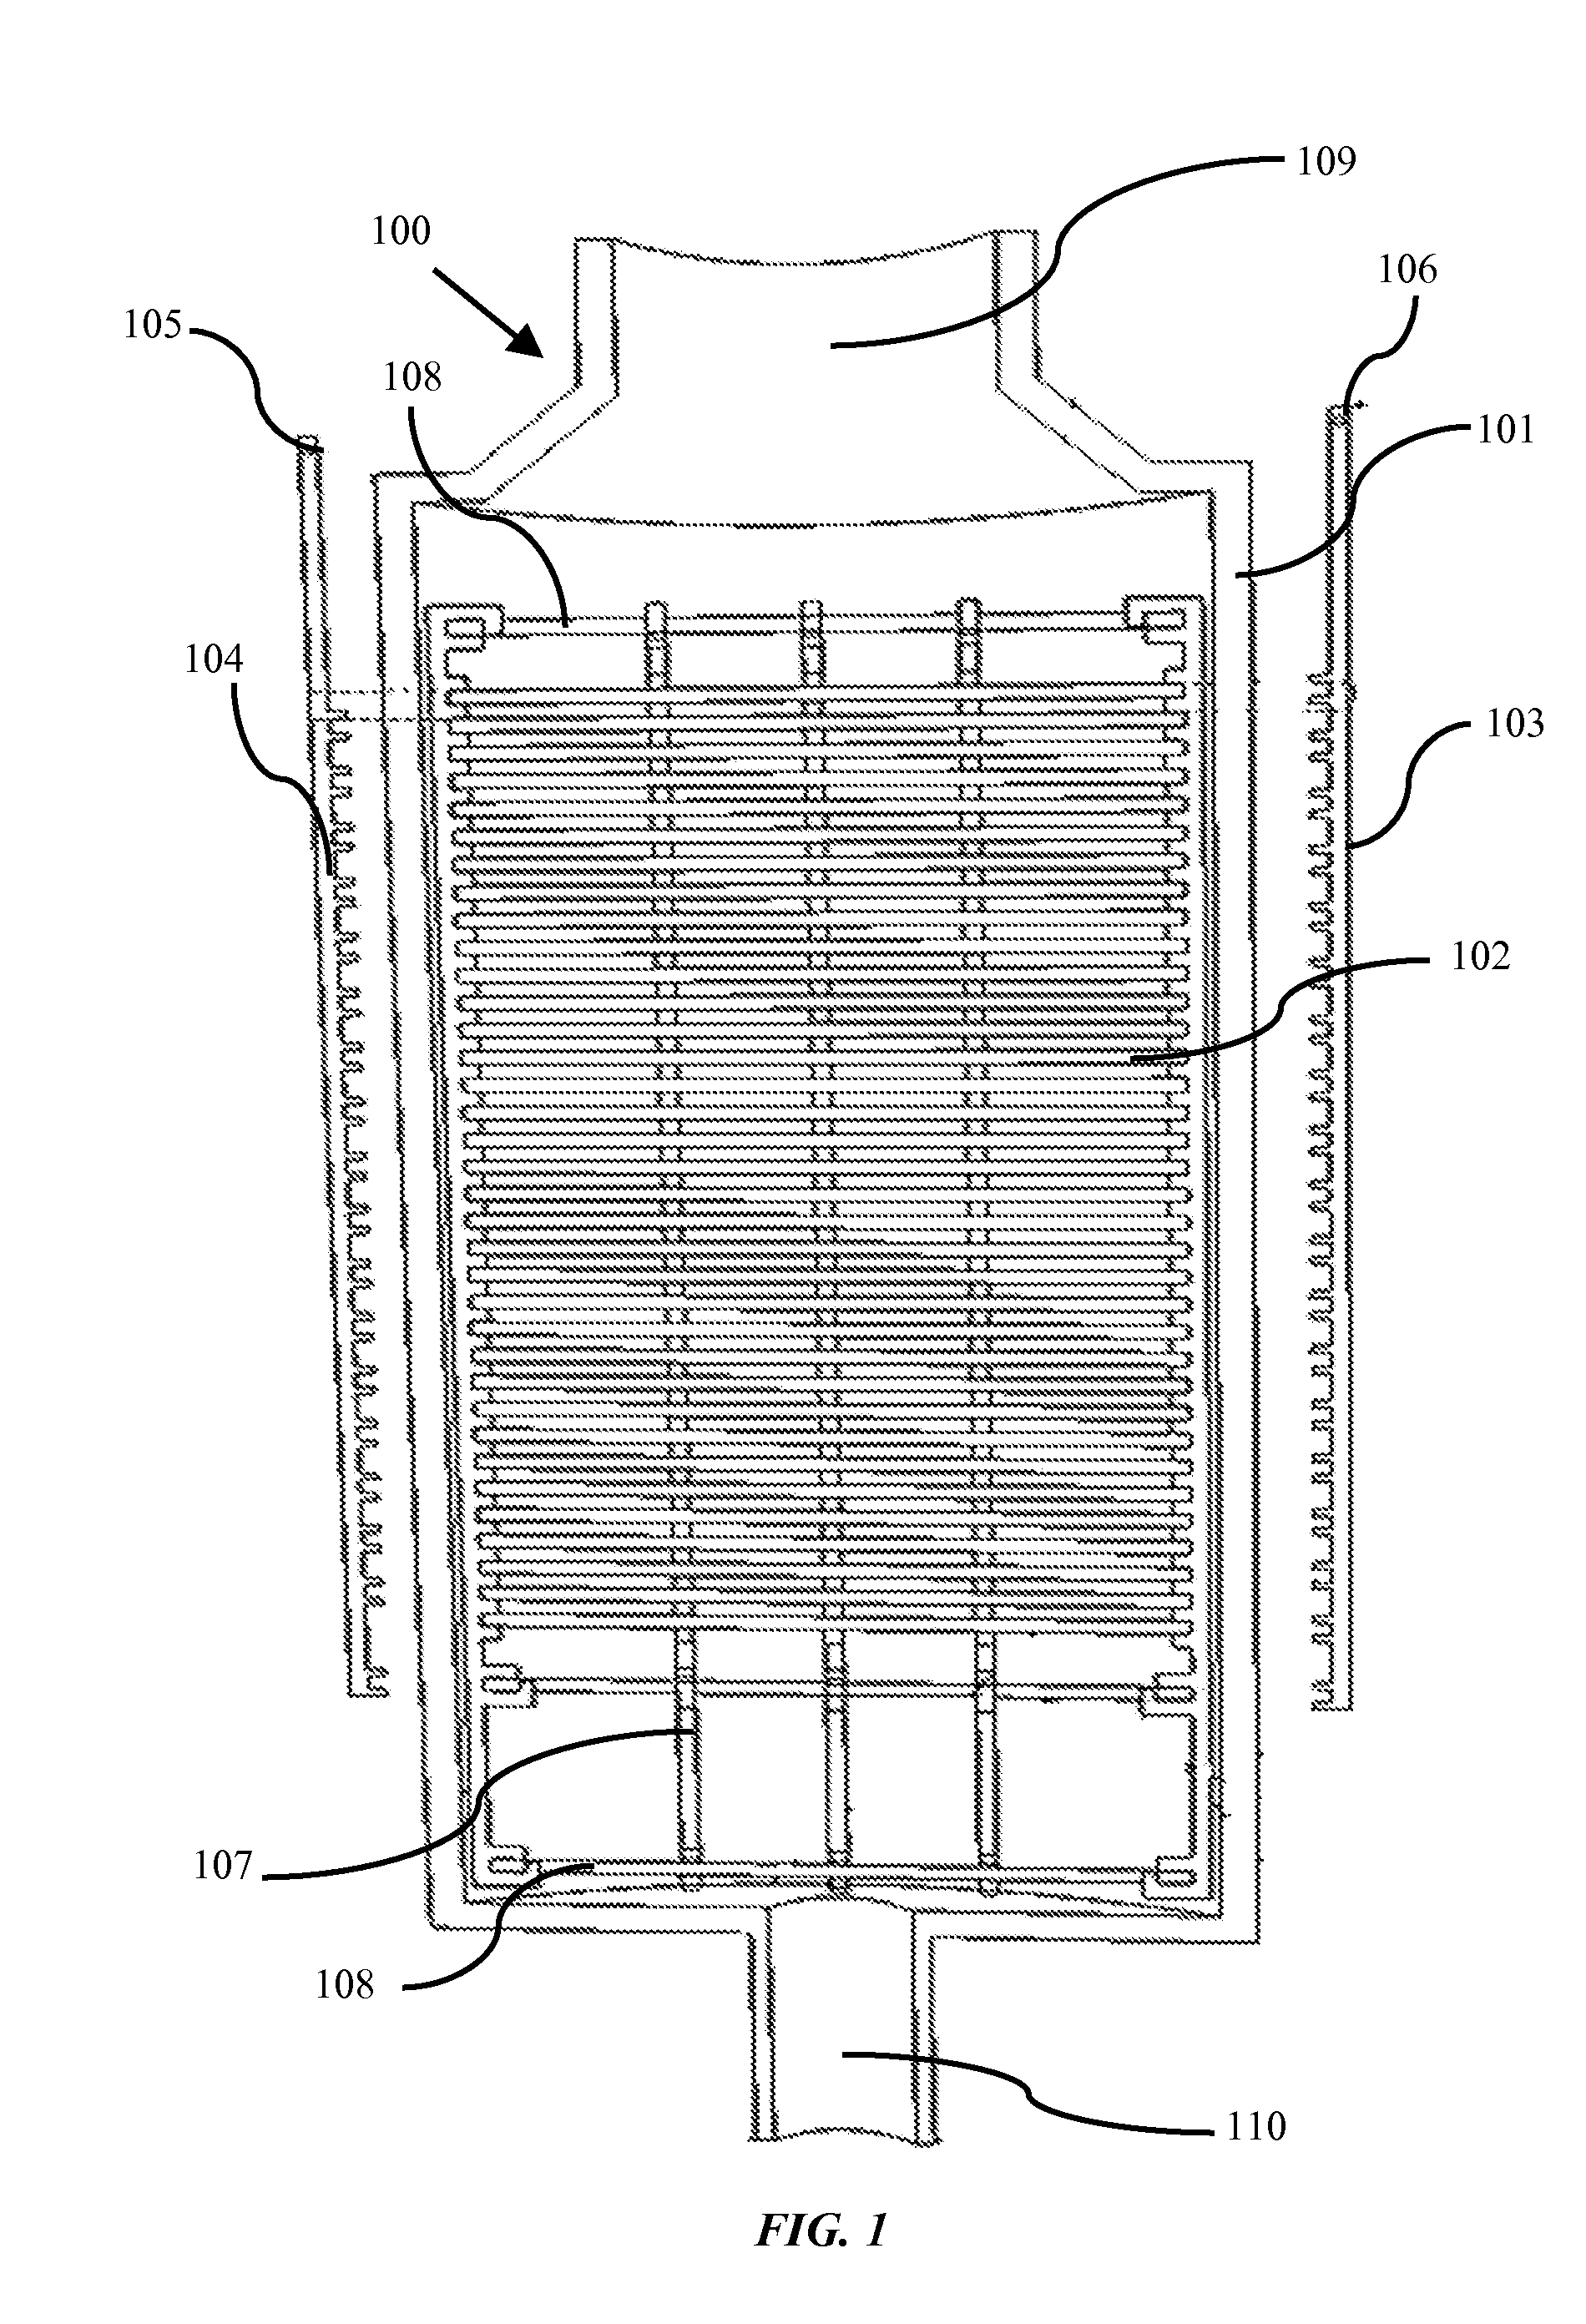 System and method for generating hydrogen and oxygen gases